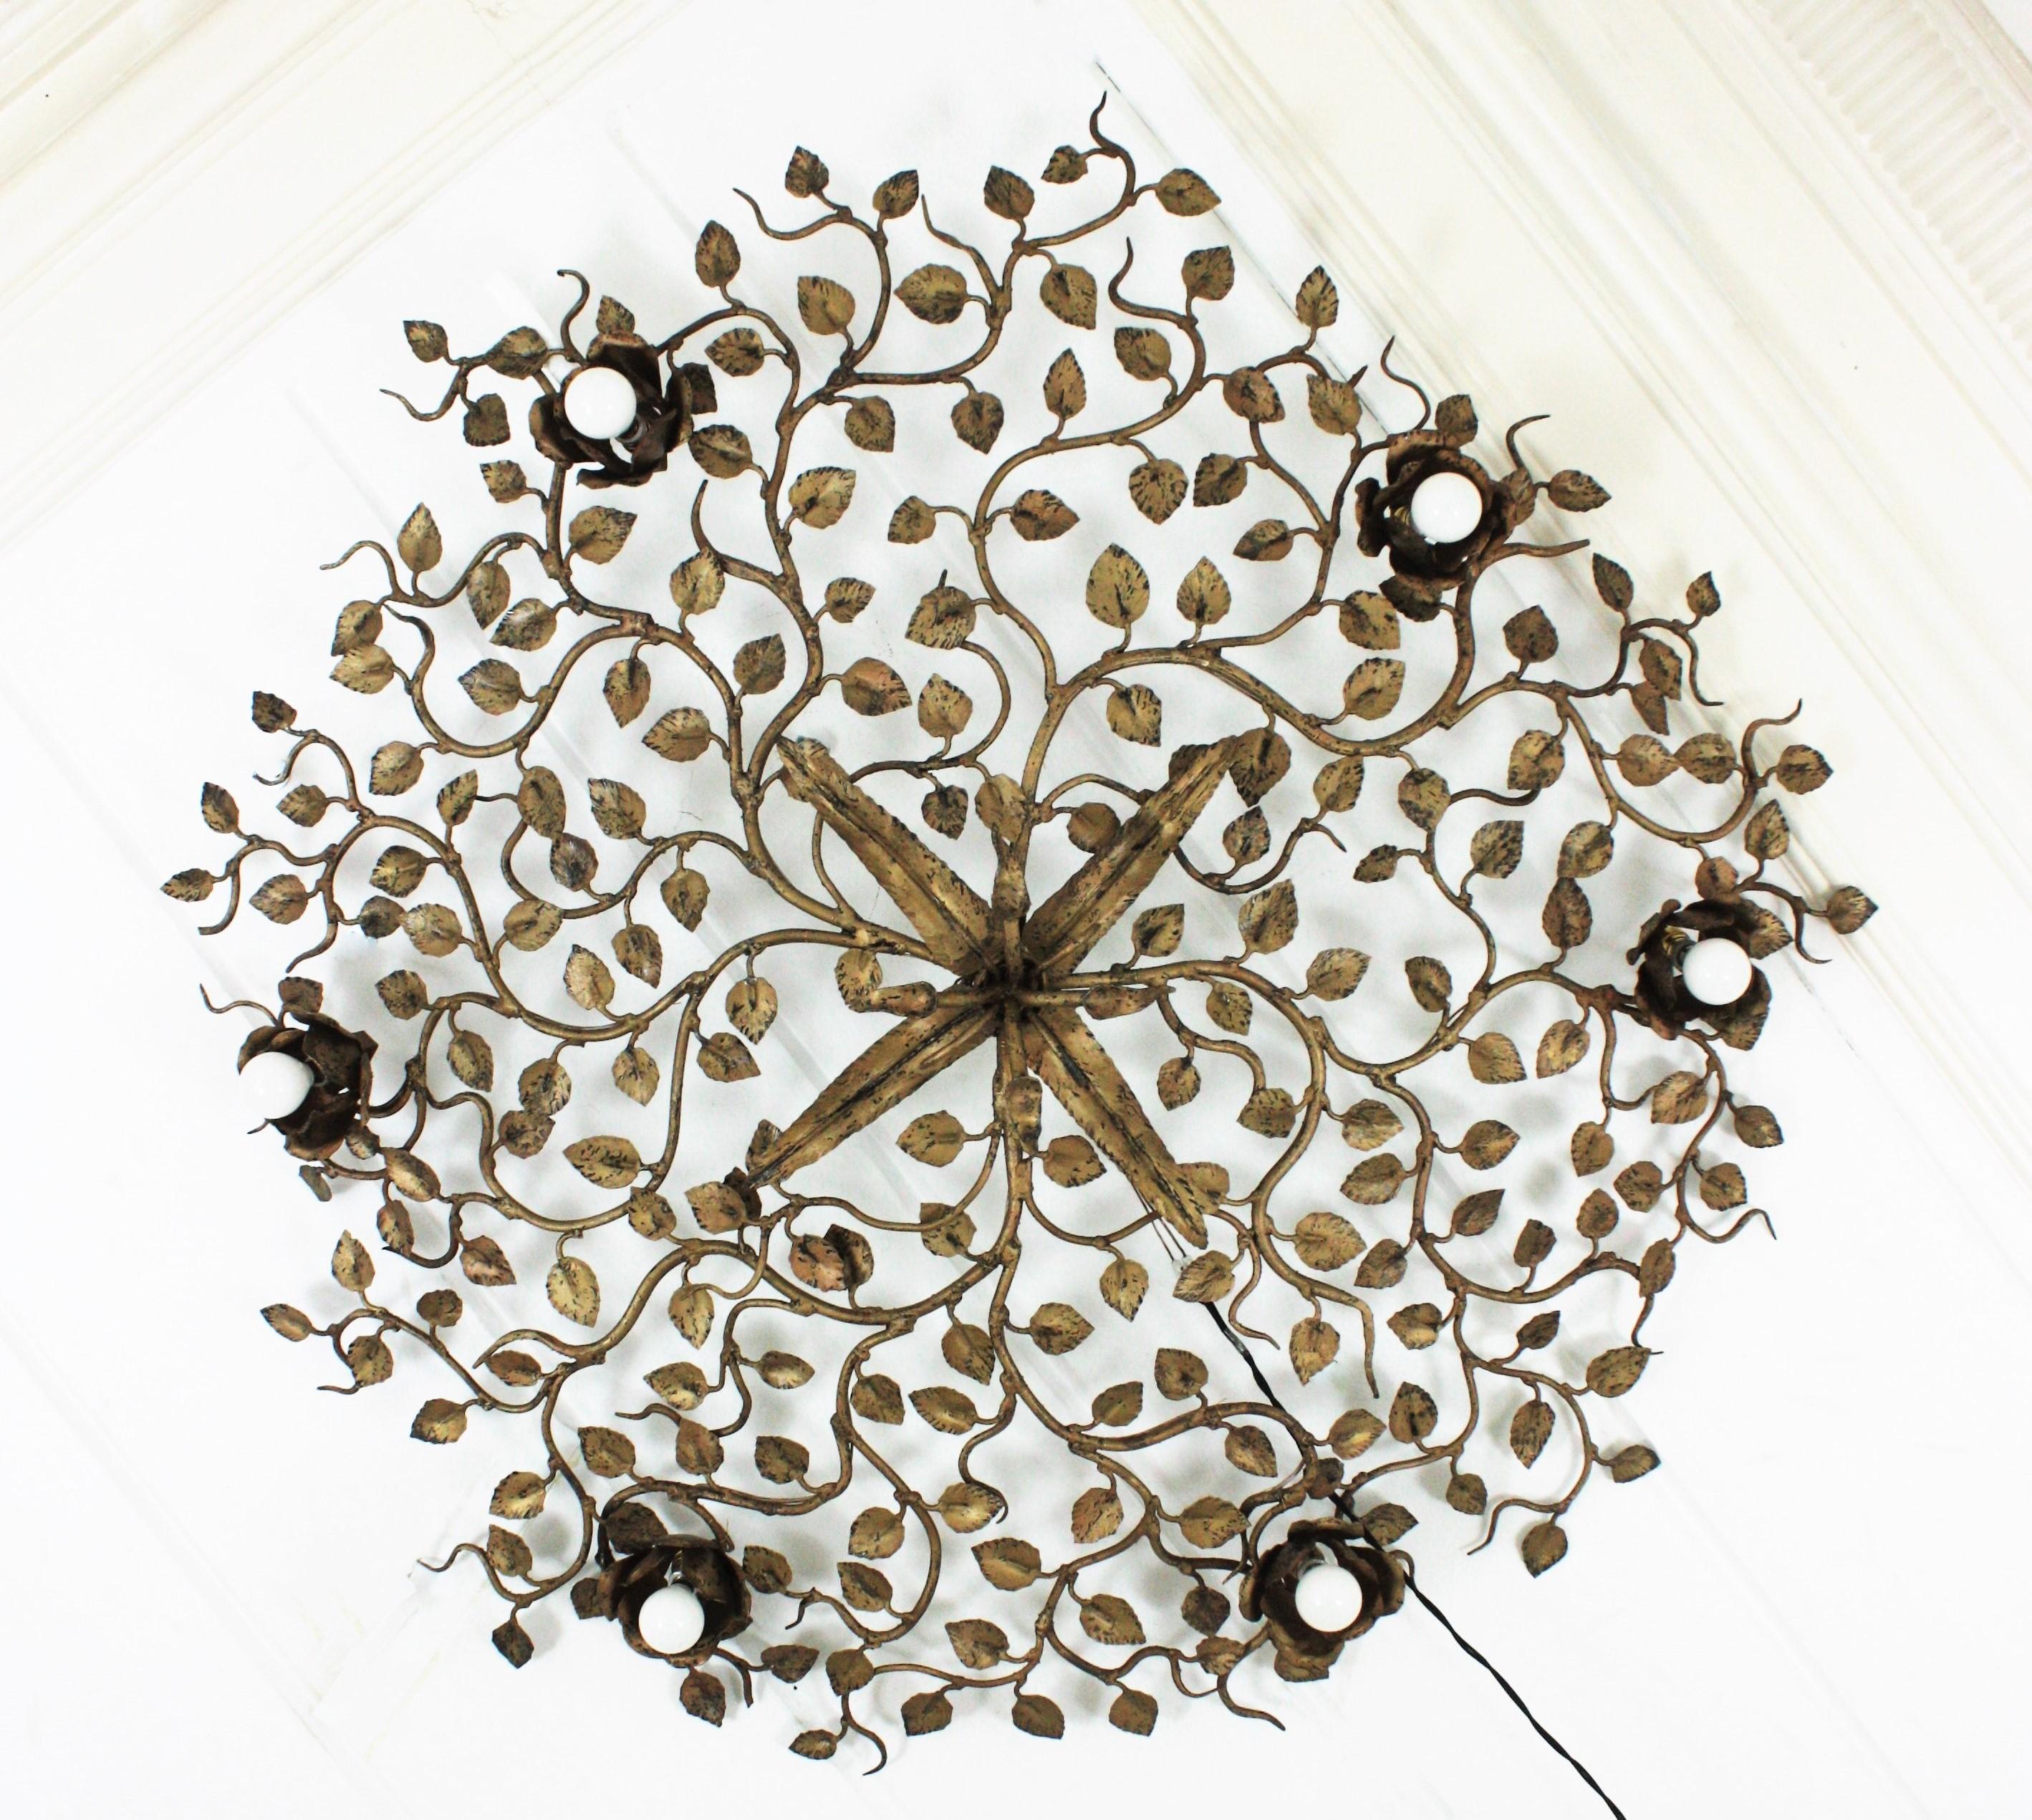 Rosebush tree ornate ceiling flush mount, hand forged gilt iron, Spain, 1950s-1960s. 
Monumental large size ( 47,24 in ) hand-hammered gilt iron foliage flower bush ceiling light fixture with six flower lights.
This ceiling light fixture was